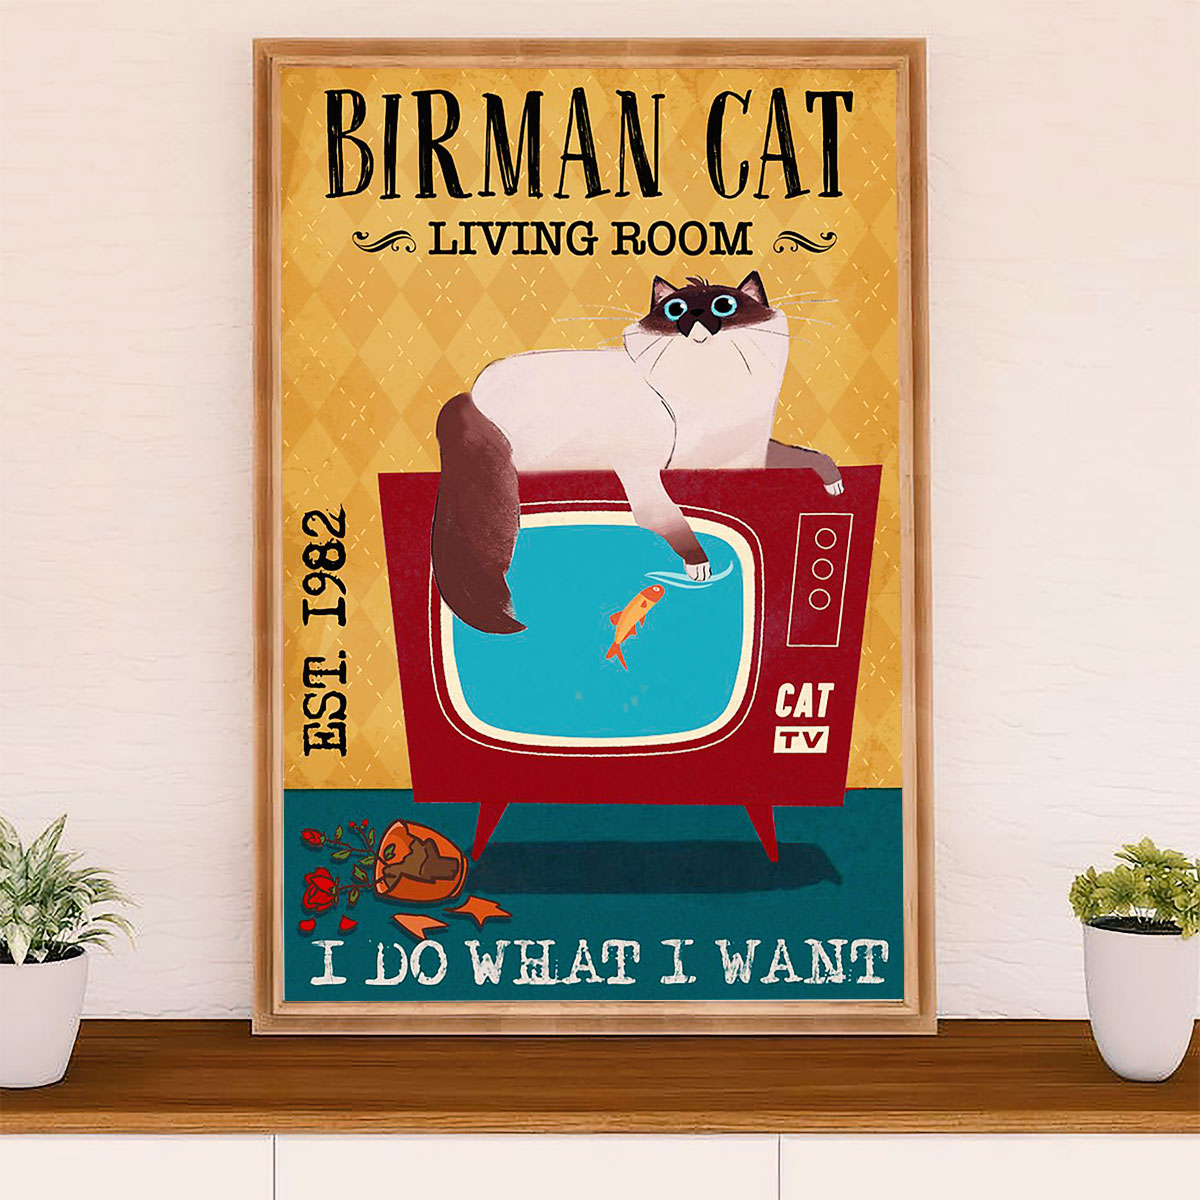 Funny Cute Cat Canvas Wall Art Prints | Birman Cat in Living Room | Home Decor Gift for Cat Lover